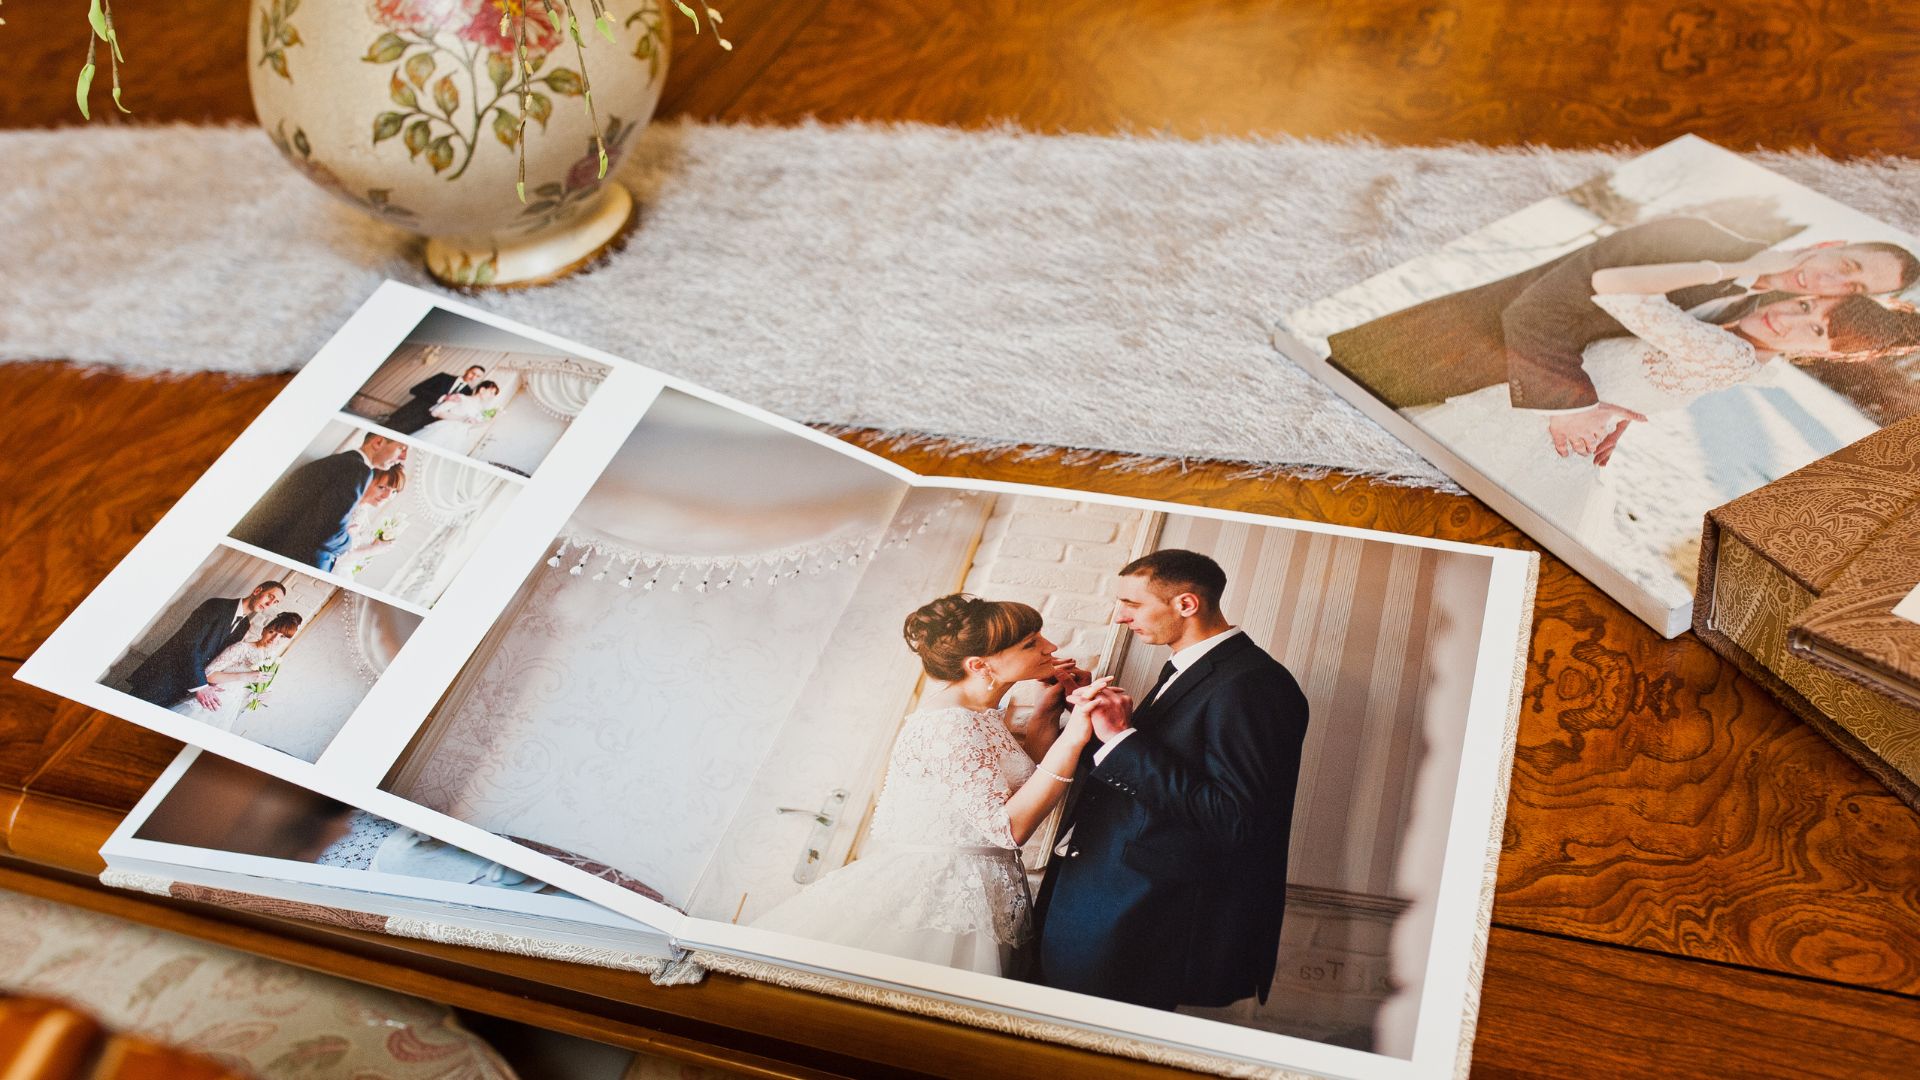 Cover all the photos you want taken on your wedding video and photo shot list